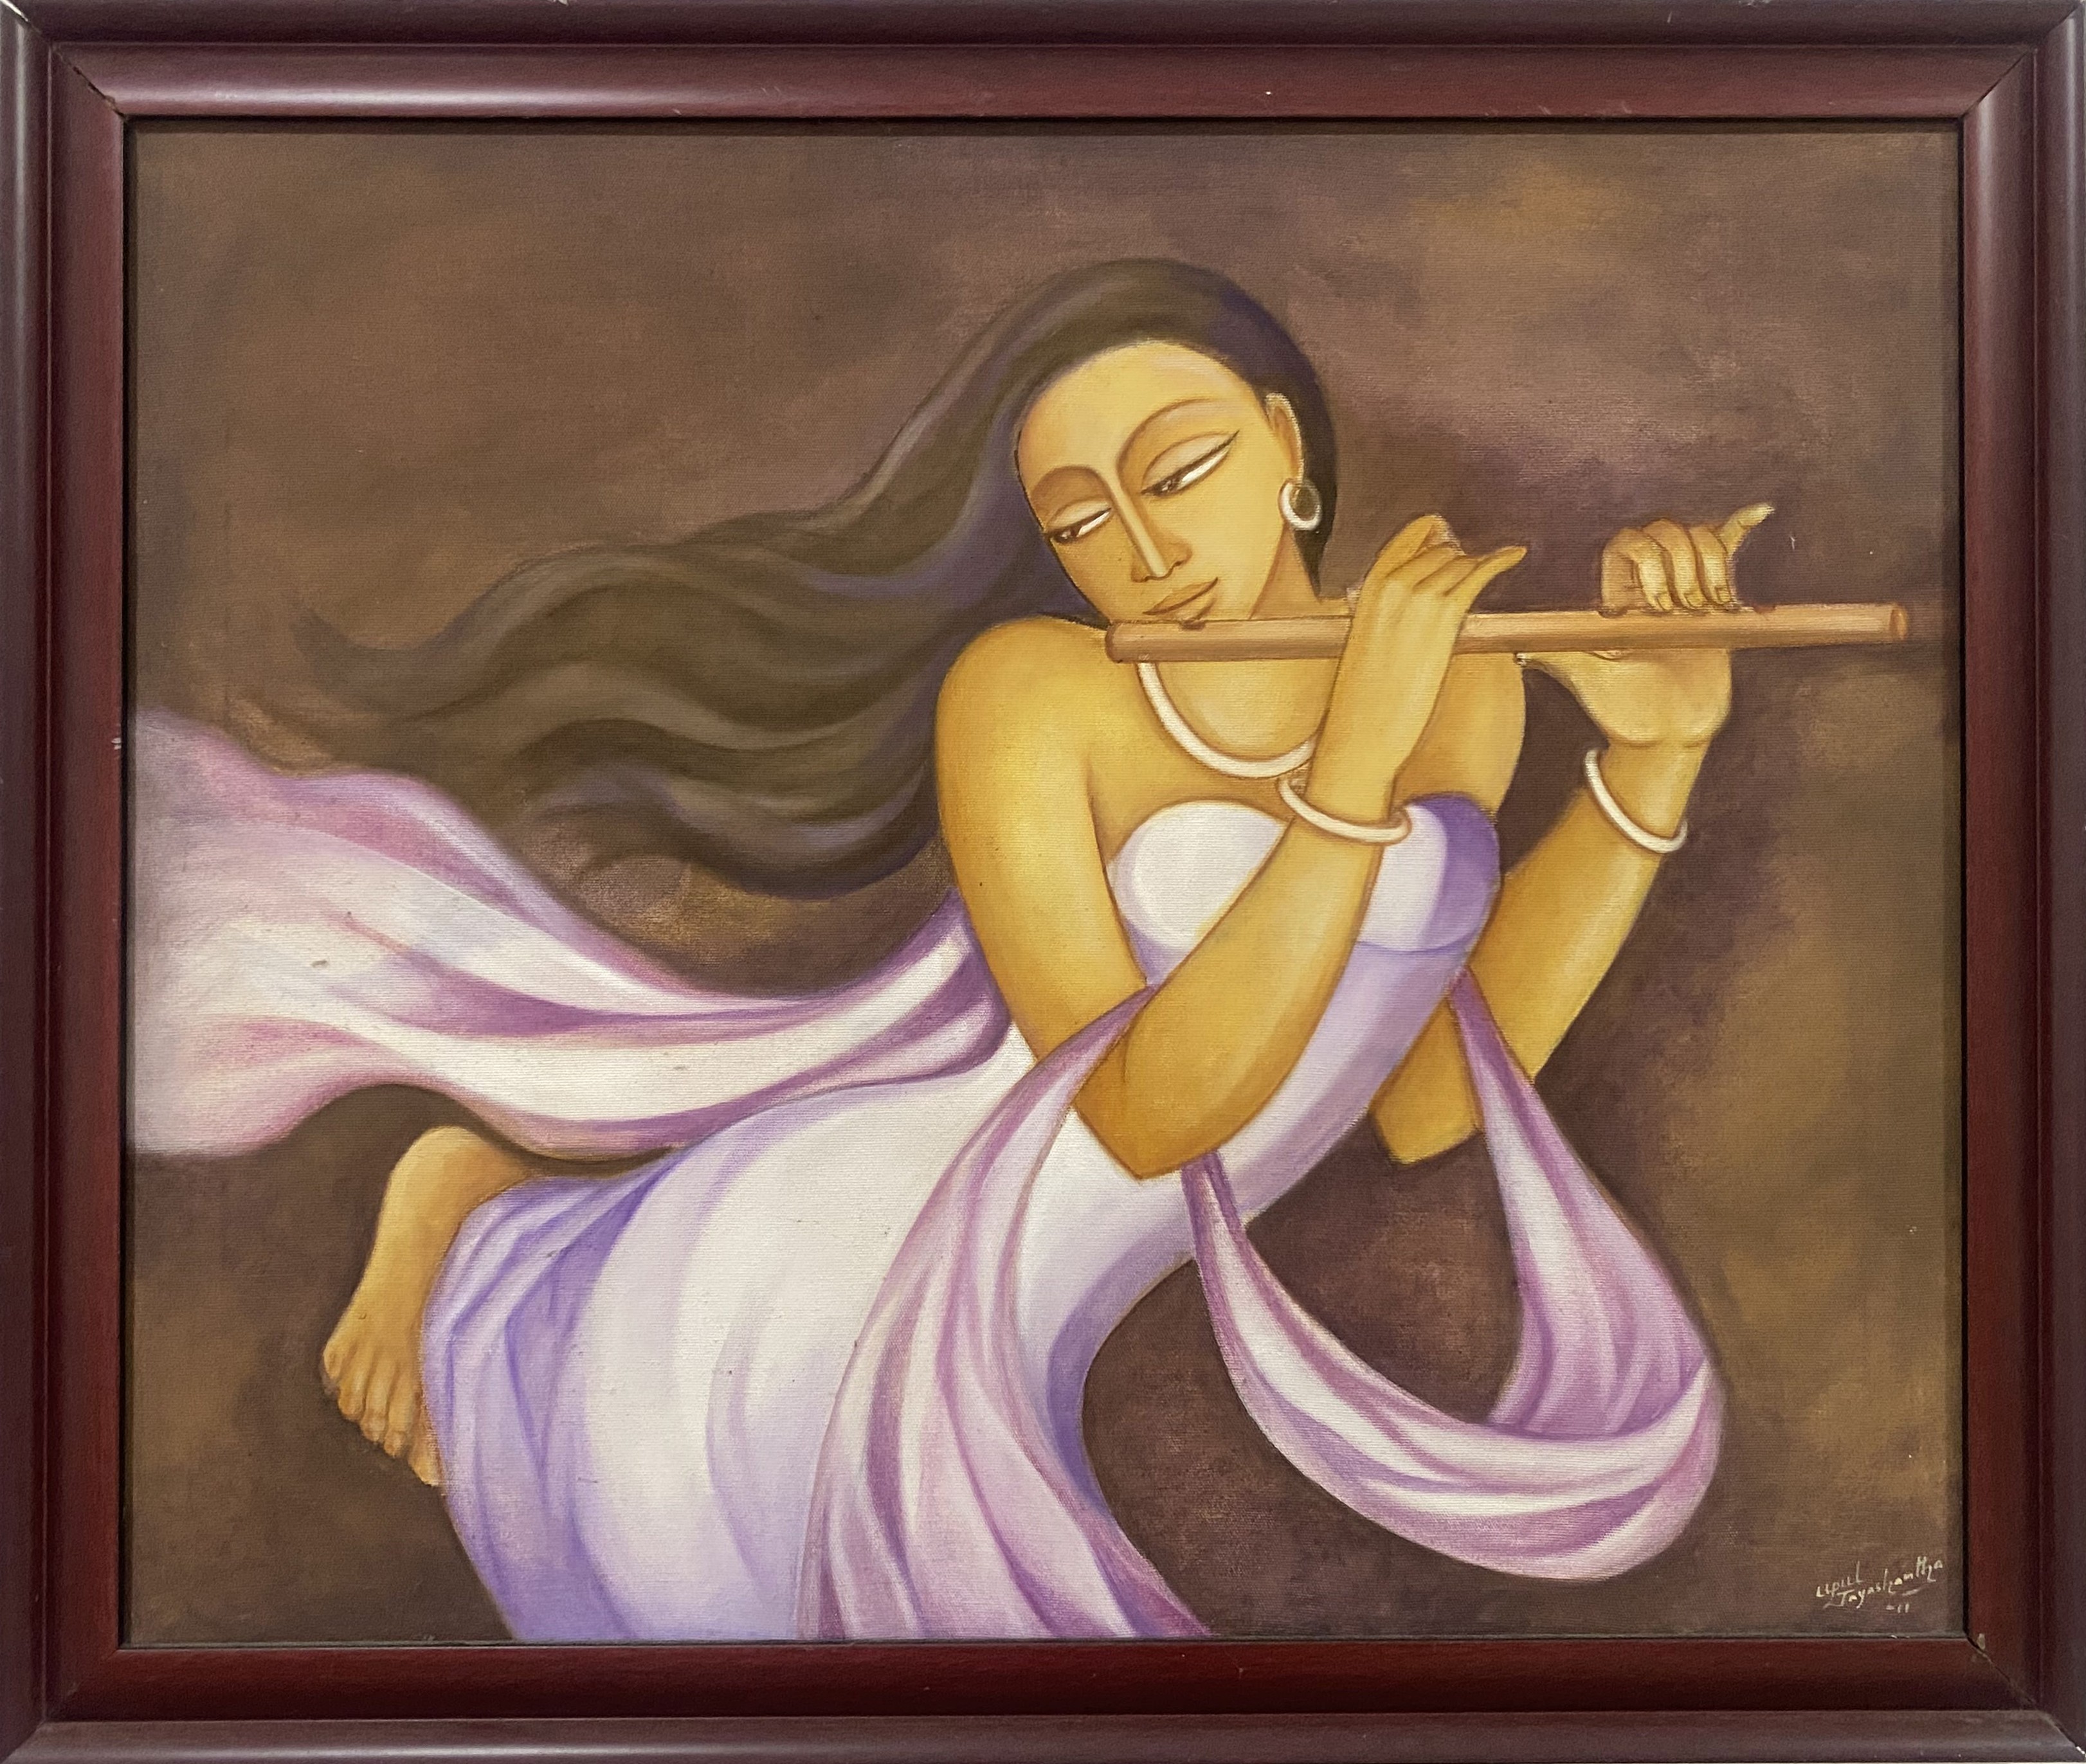 Angel with the flute by Upul Jayashantha